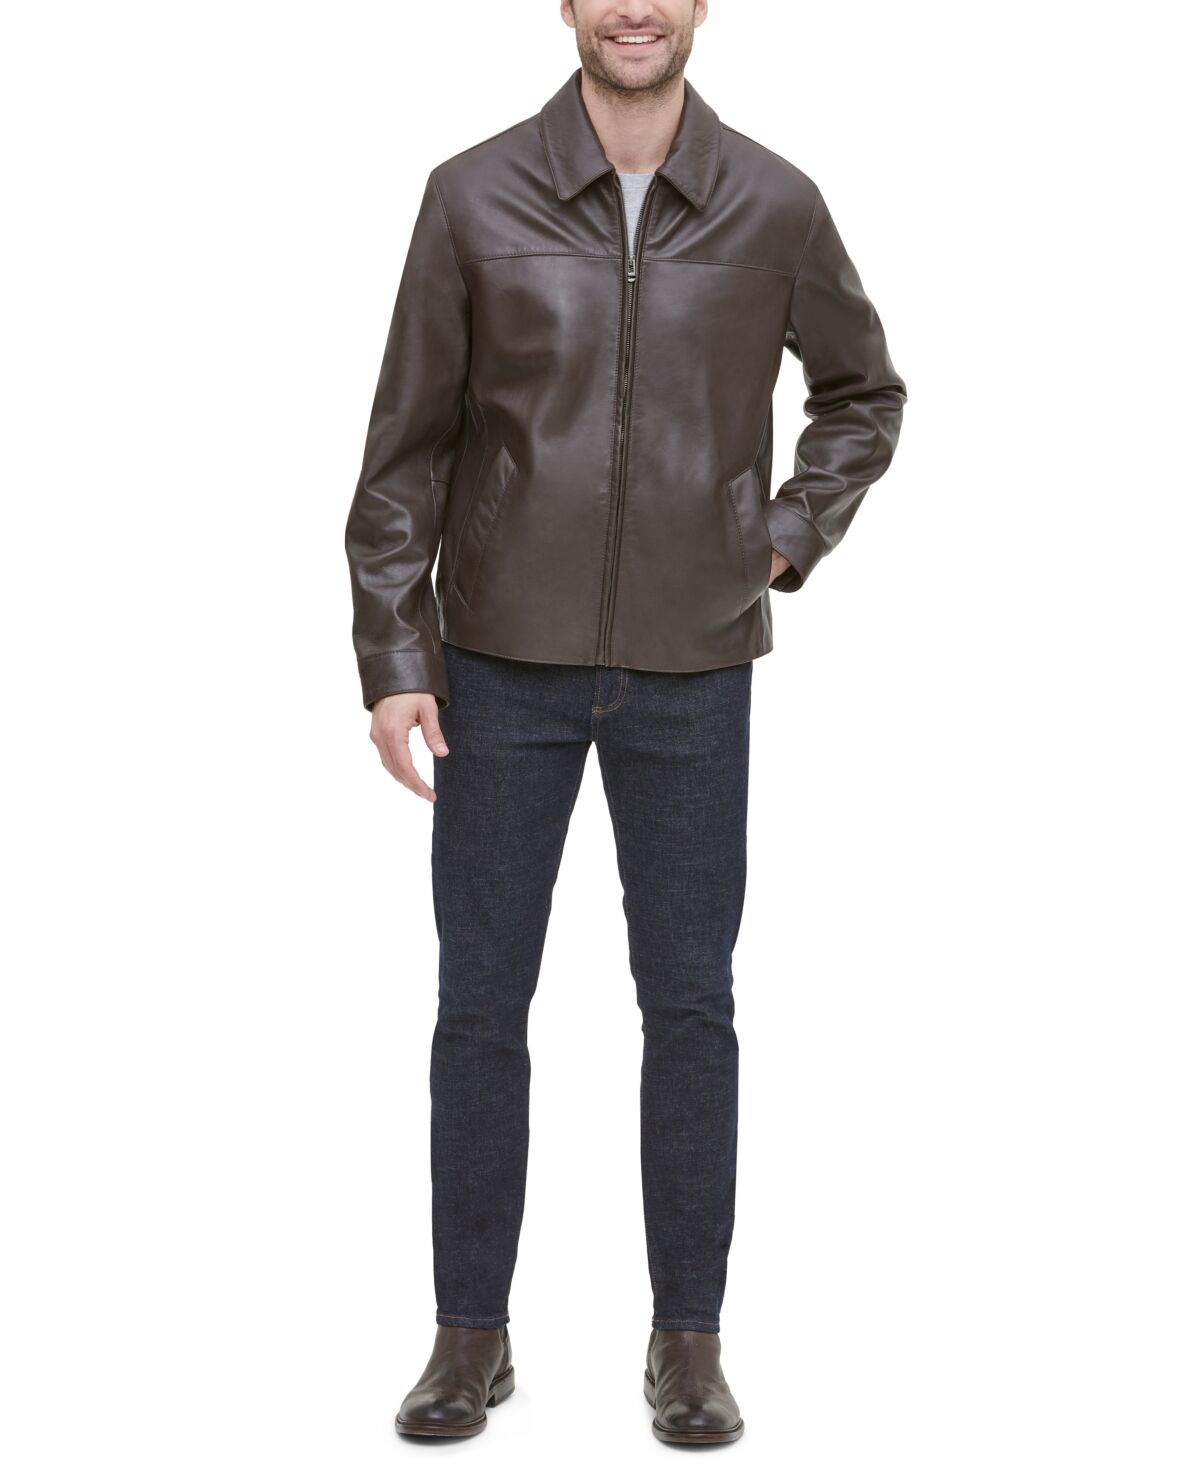 Cole Haan Men's Leather Jacket, Created for Macy's - Java